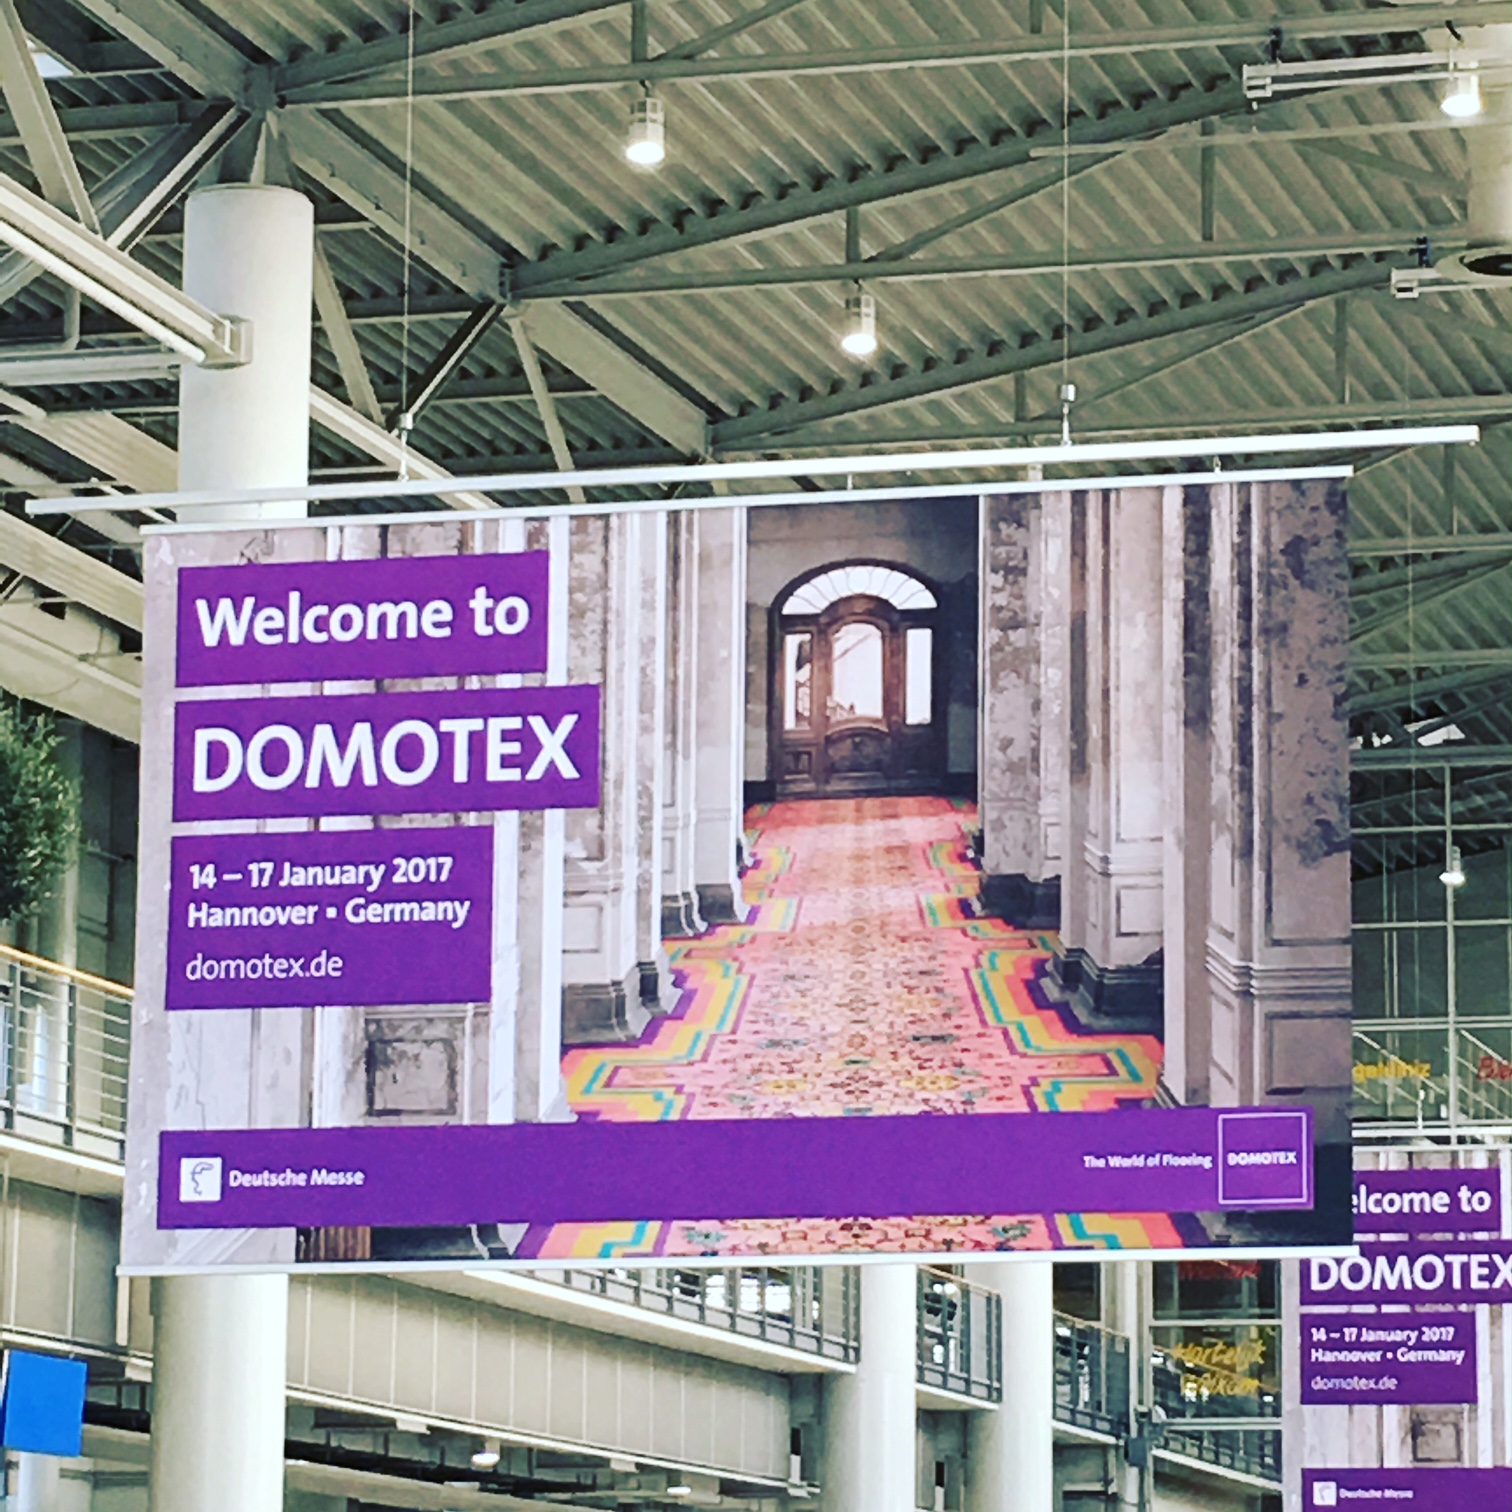 Domotex 2017 / Hannover - Germany